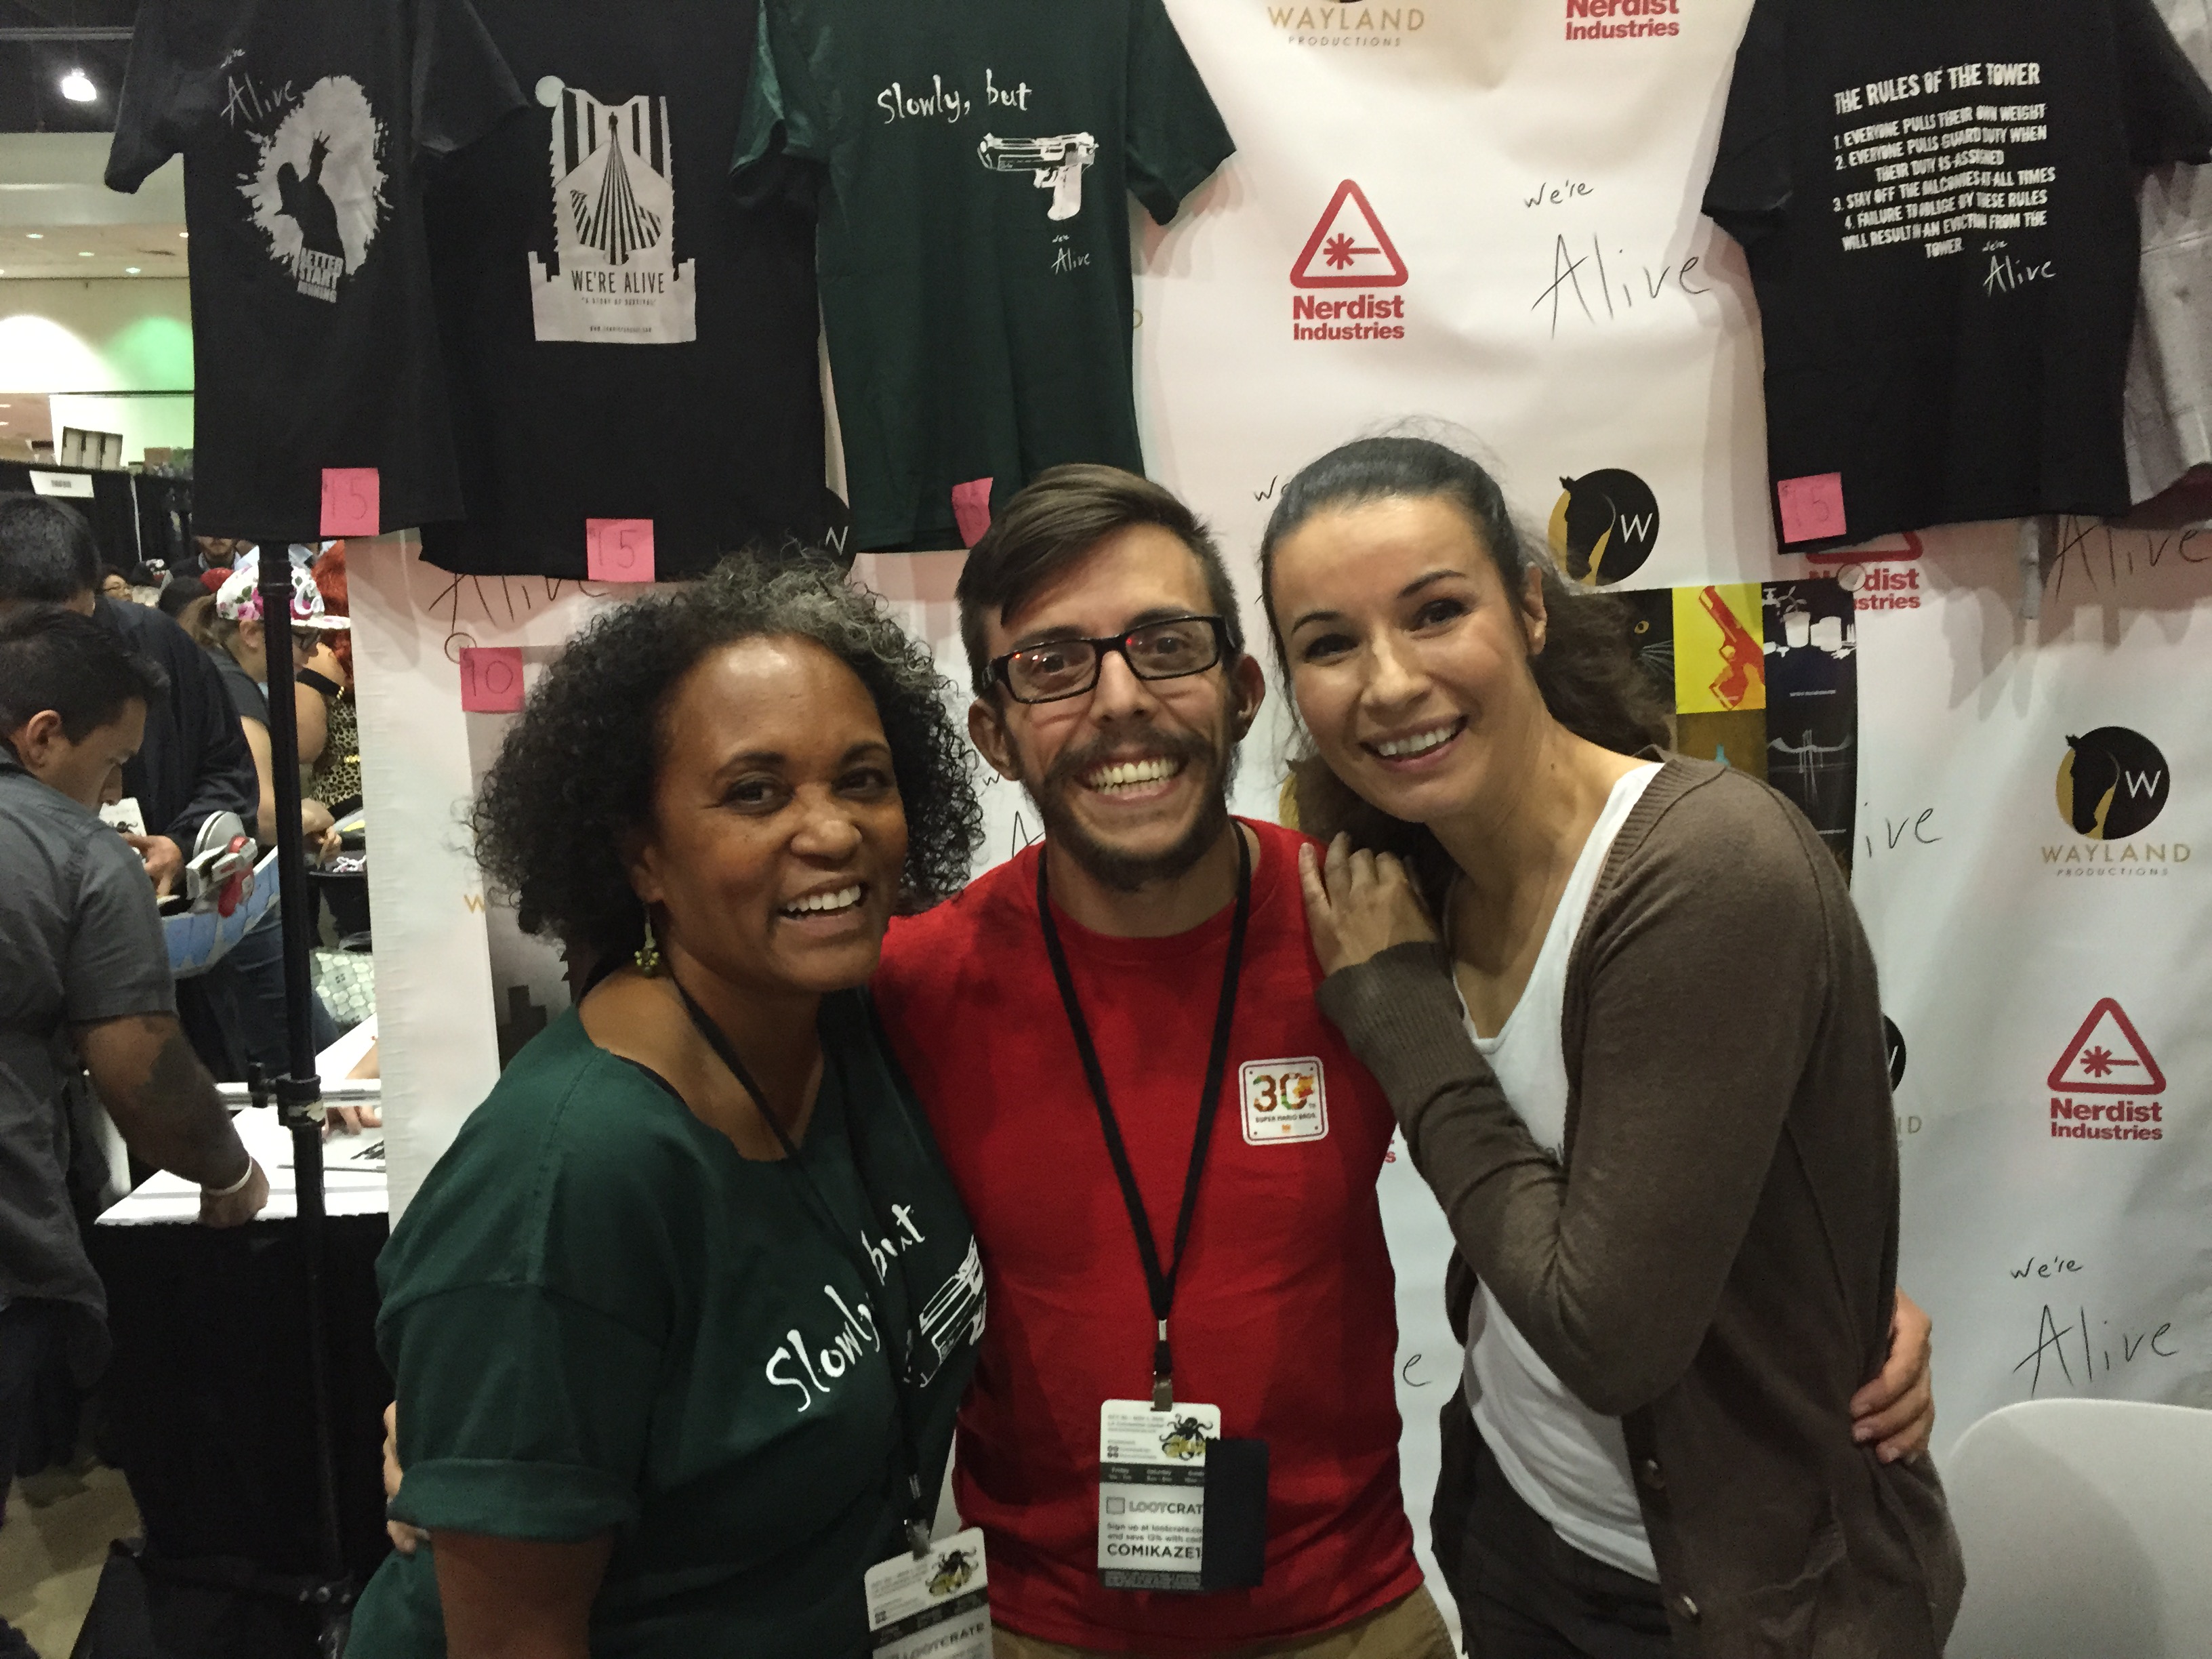 Myself, Grayson Stone and Claire Dodin, at our WE'RE ALIVE booth at Stan Lee's Comikaze 2015!